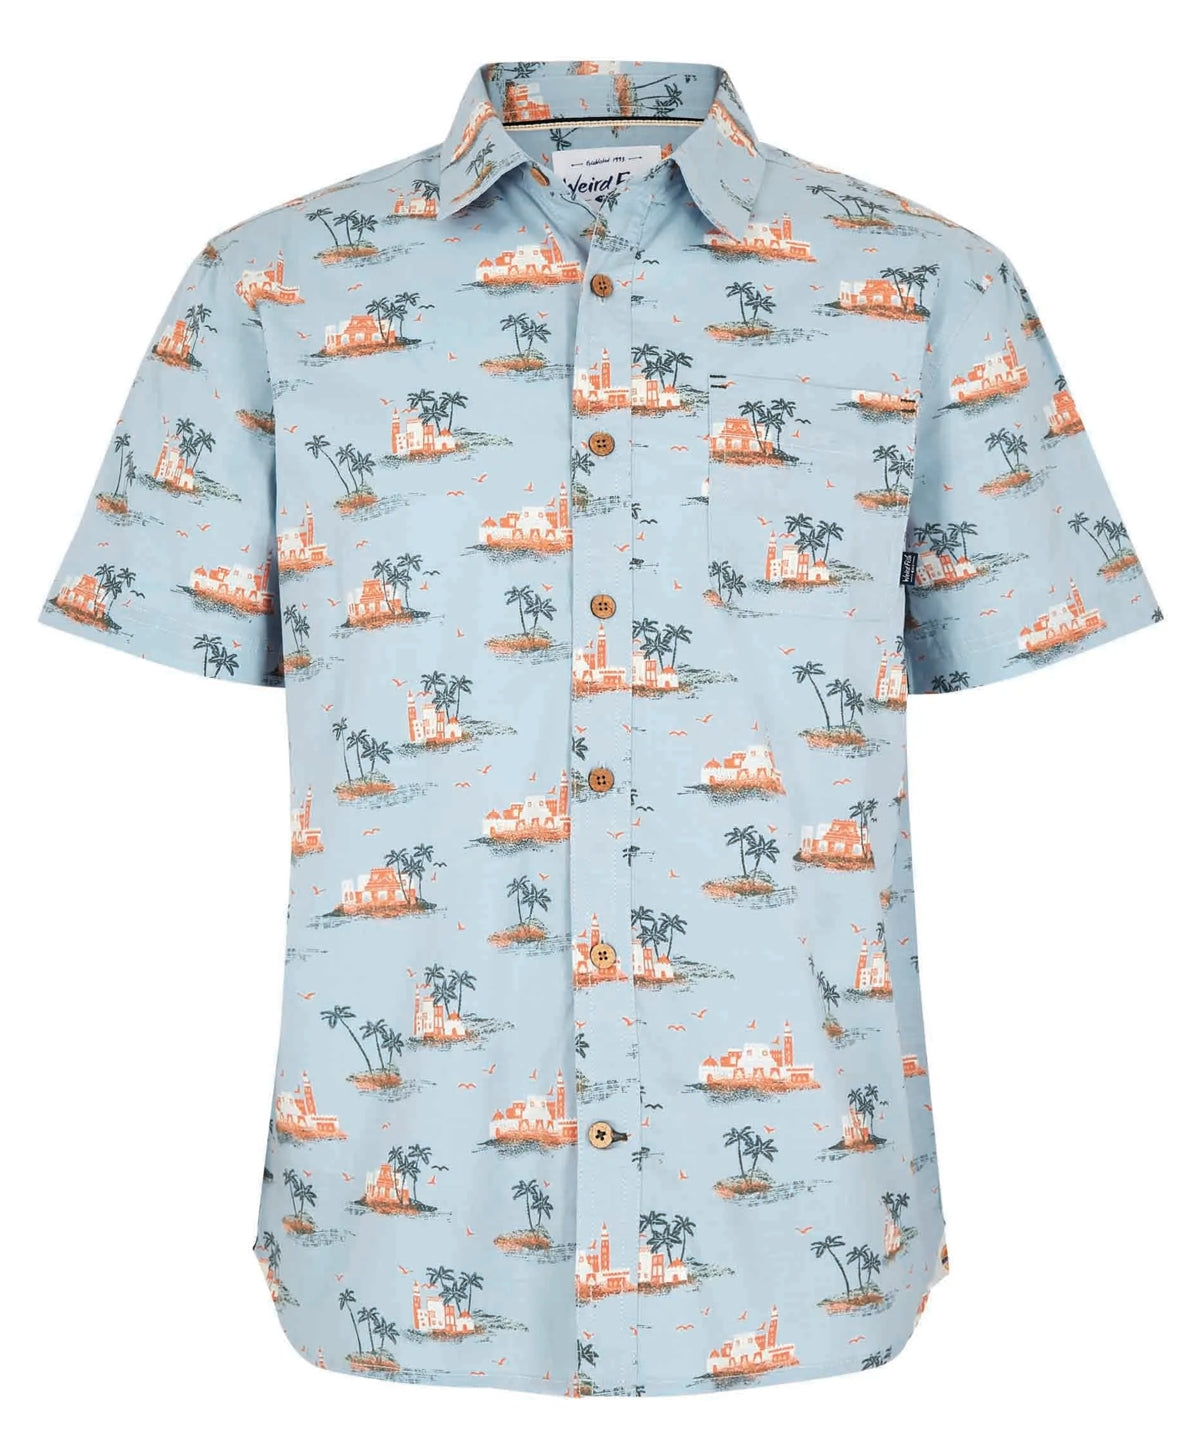 Men's short sleeve Faraway shirt from Weird Fish in Powder Blue with a tropical island print.